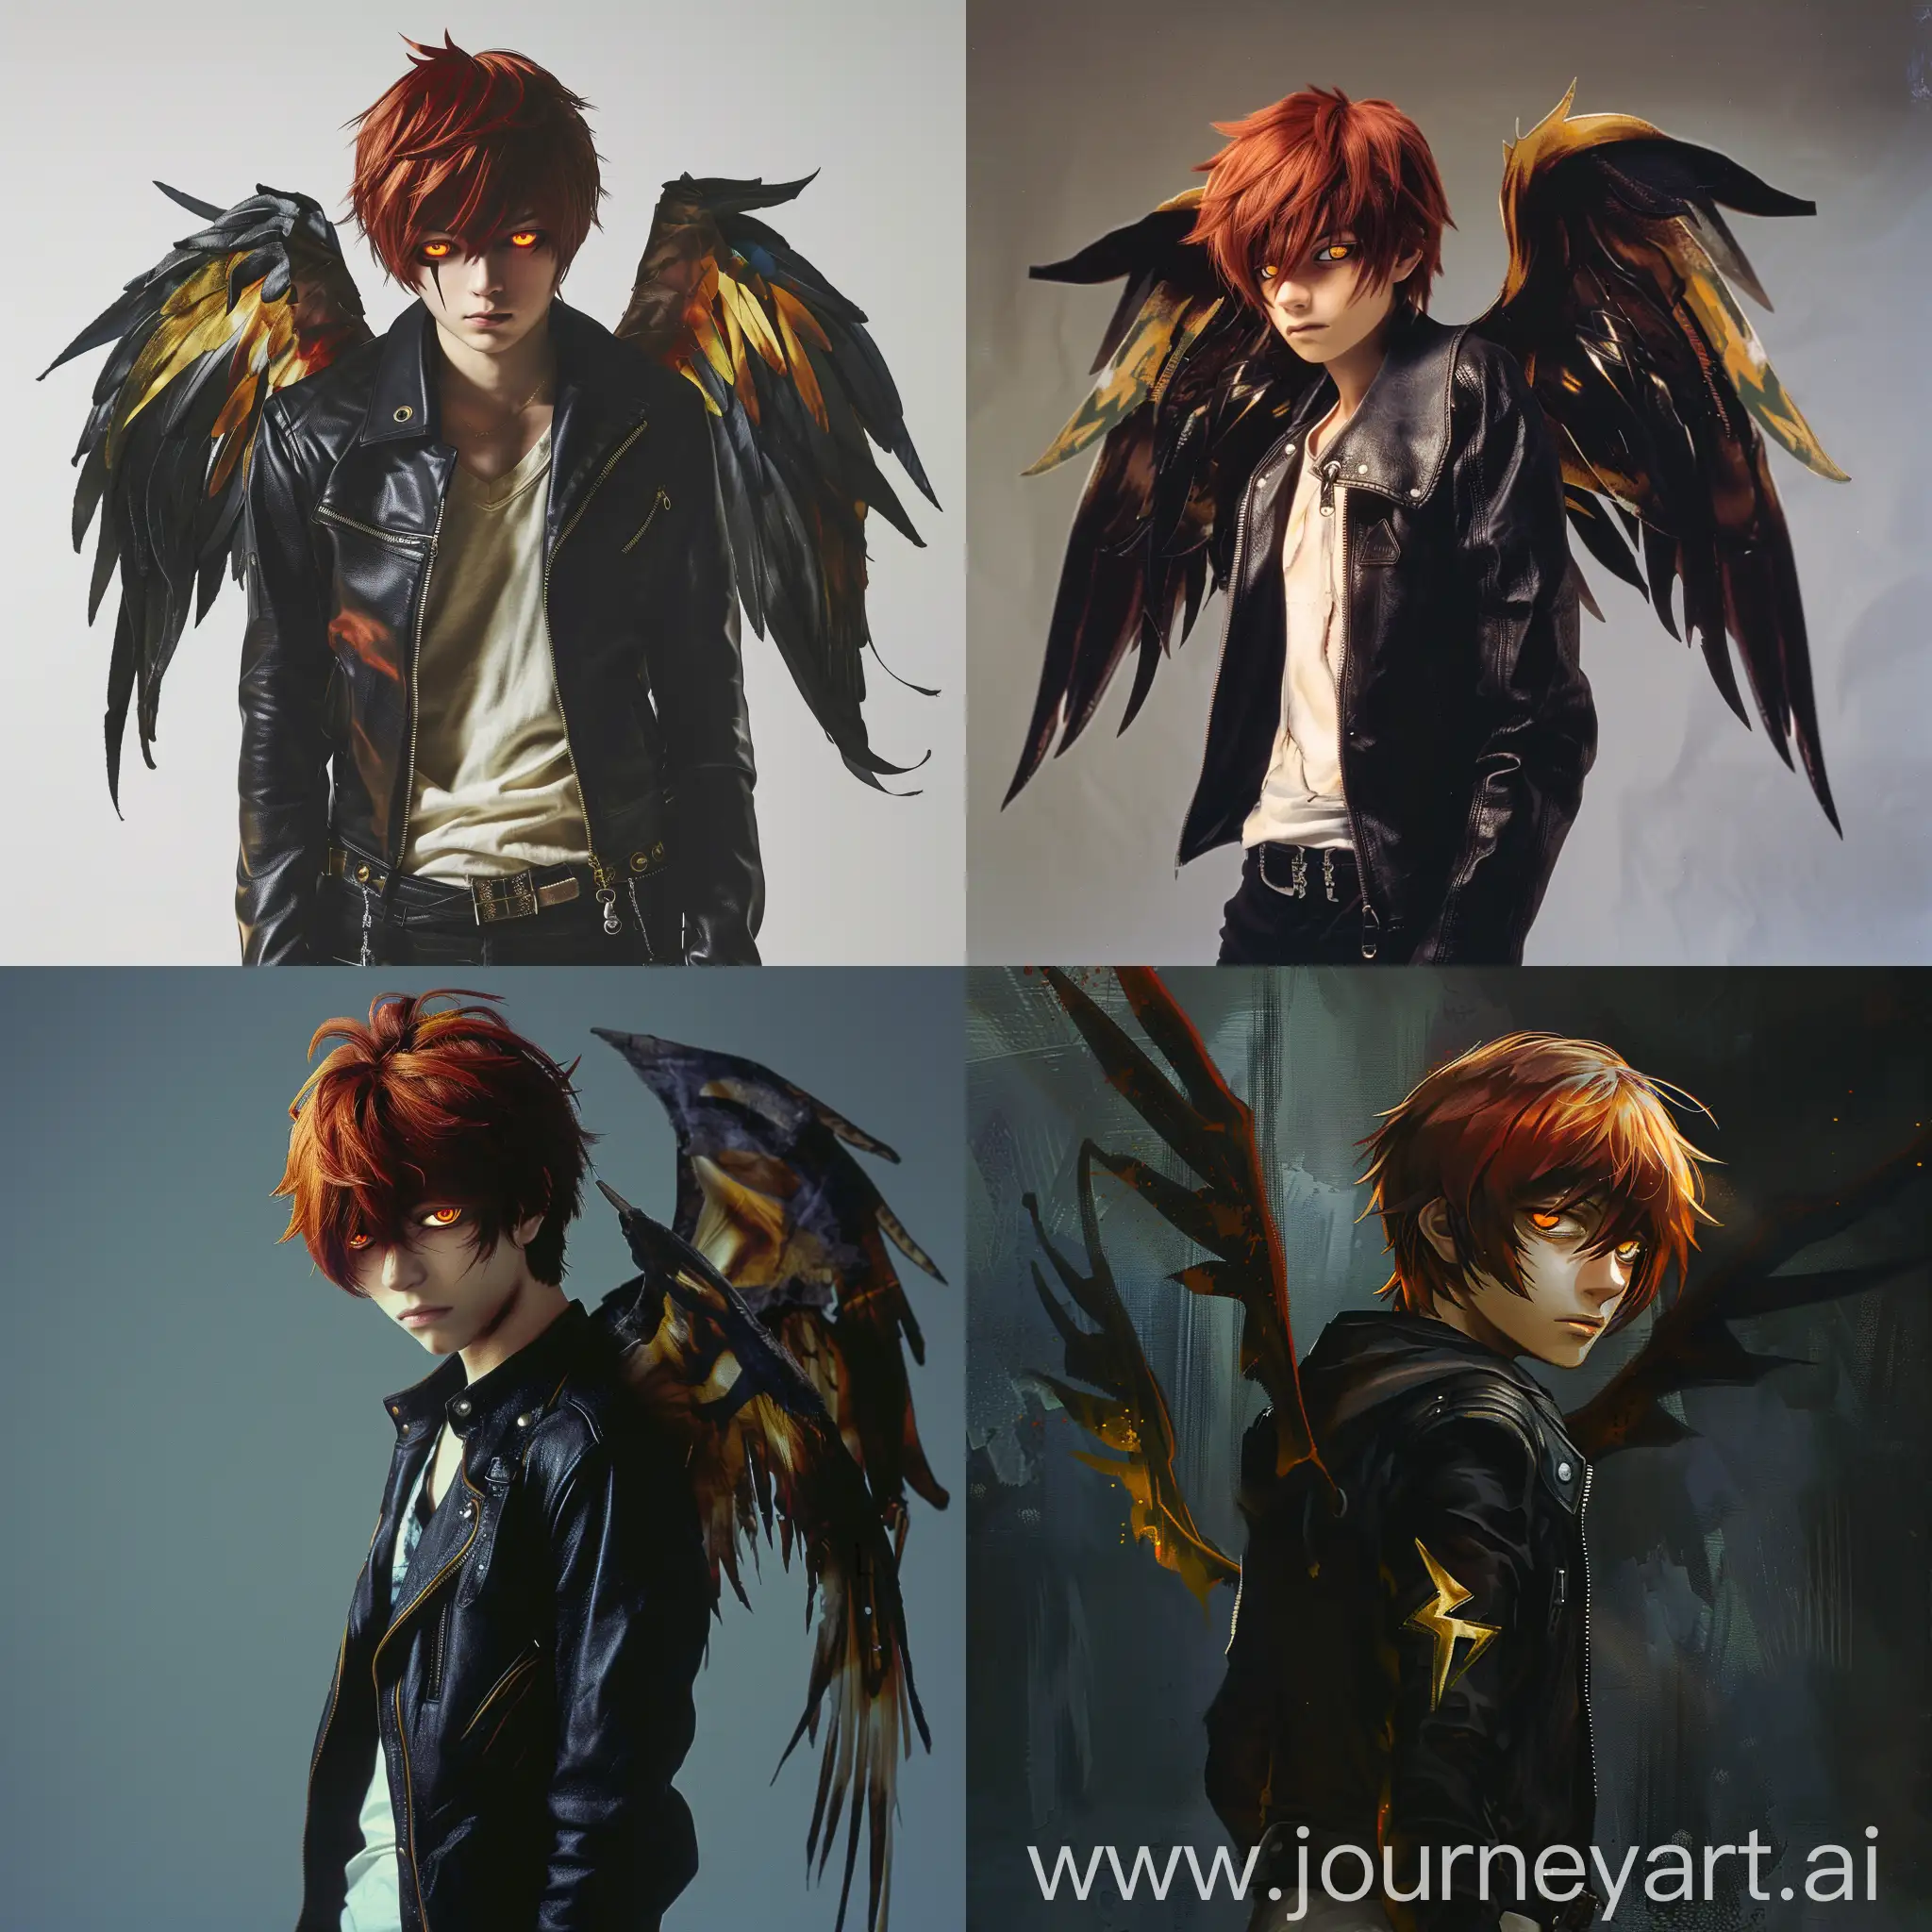 Young-Man-with-Orange-Hair-and-Wings-in-Black-Leather-Jacket